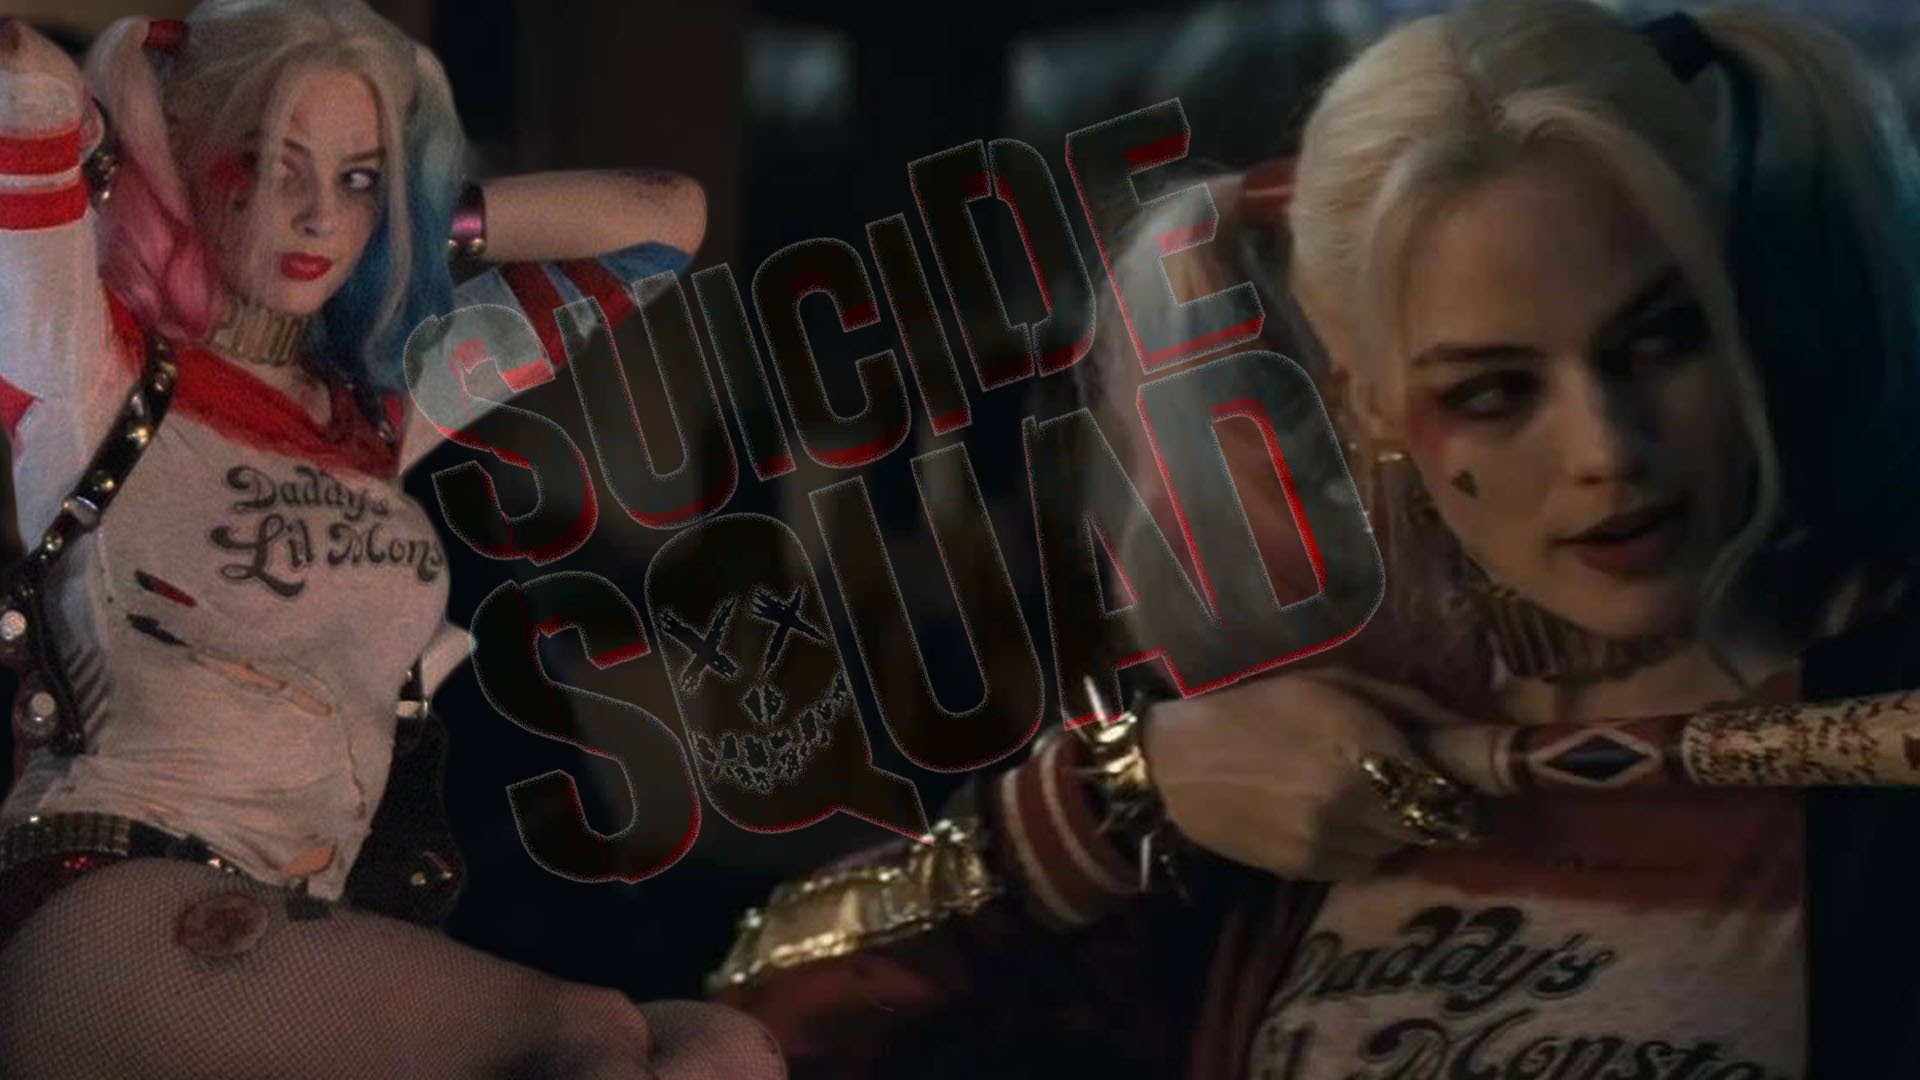 Margot Robbie Harley Quinn wallpaper ·① Download free cool backgrounds ...